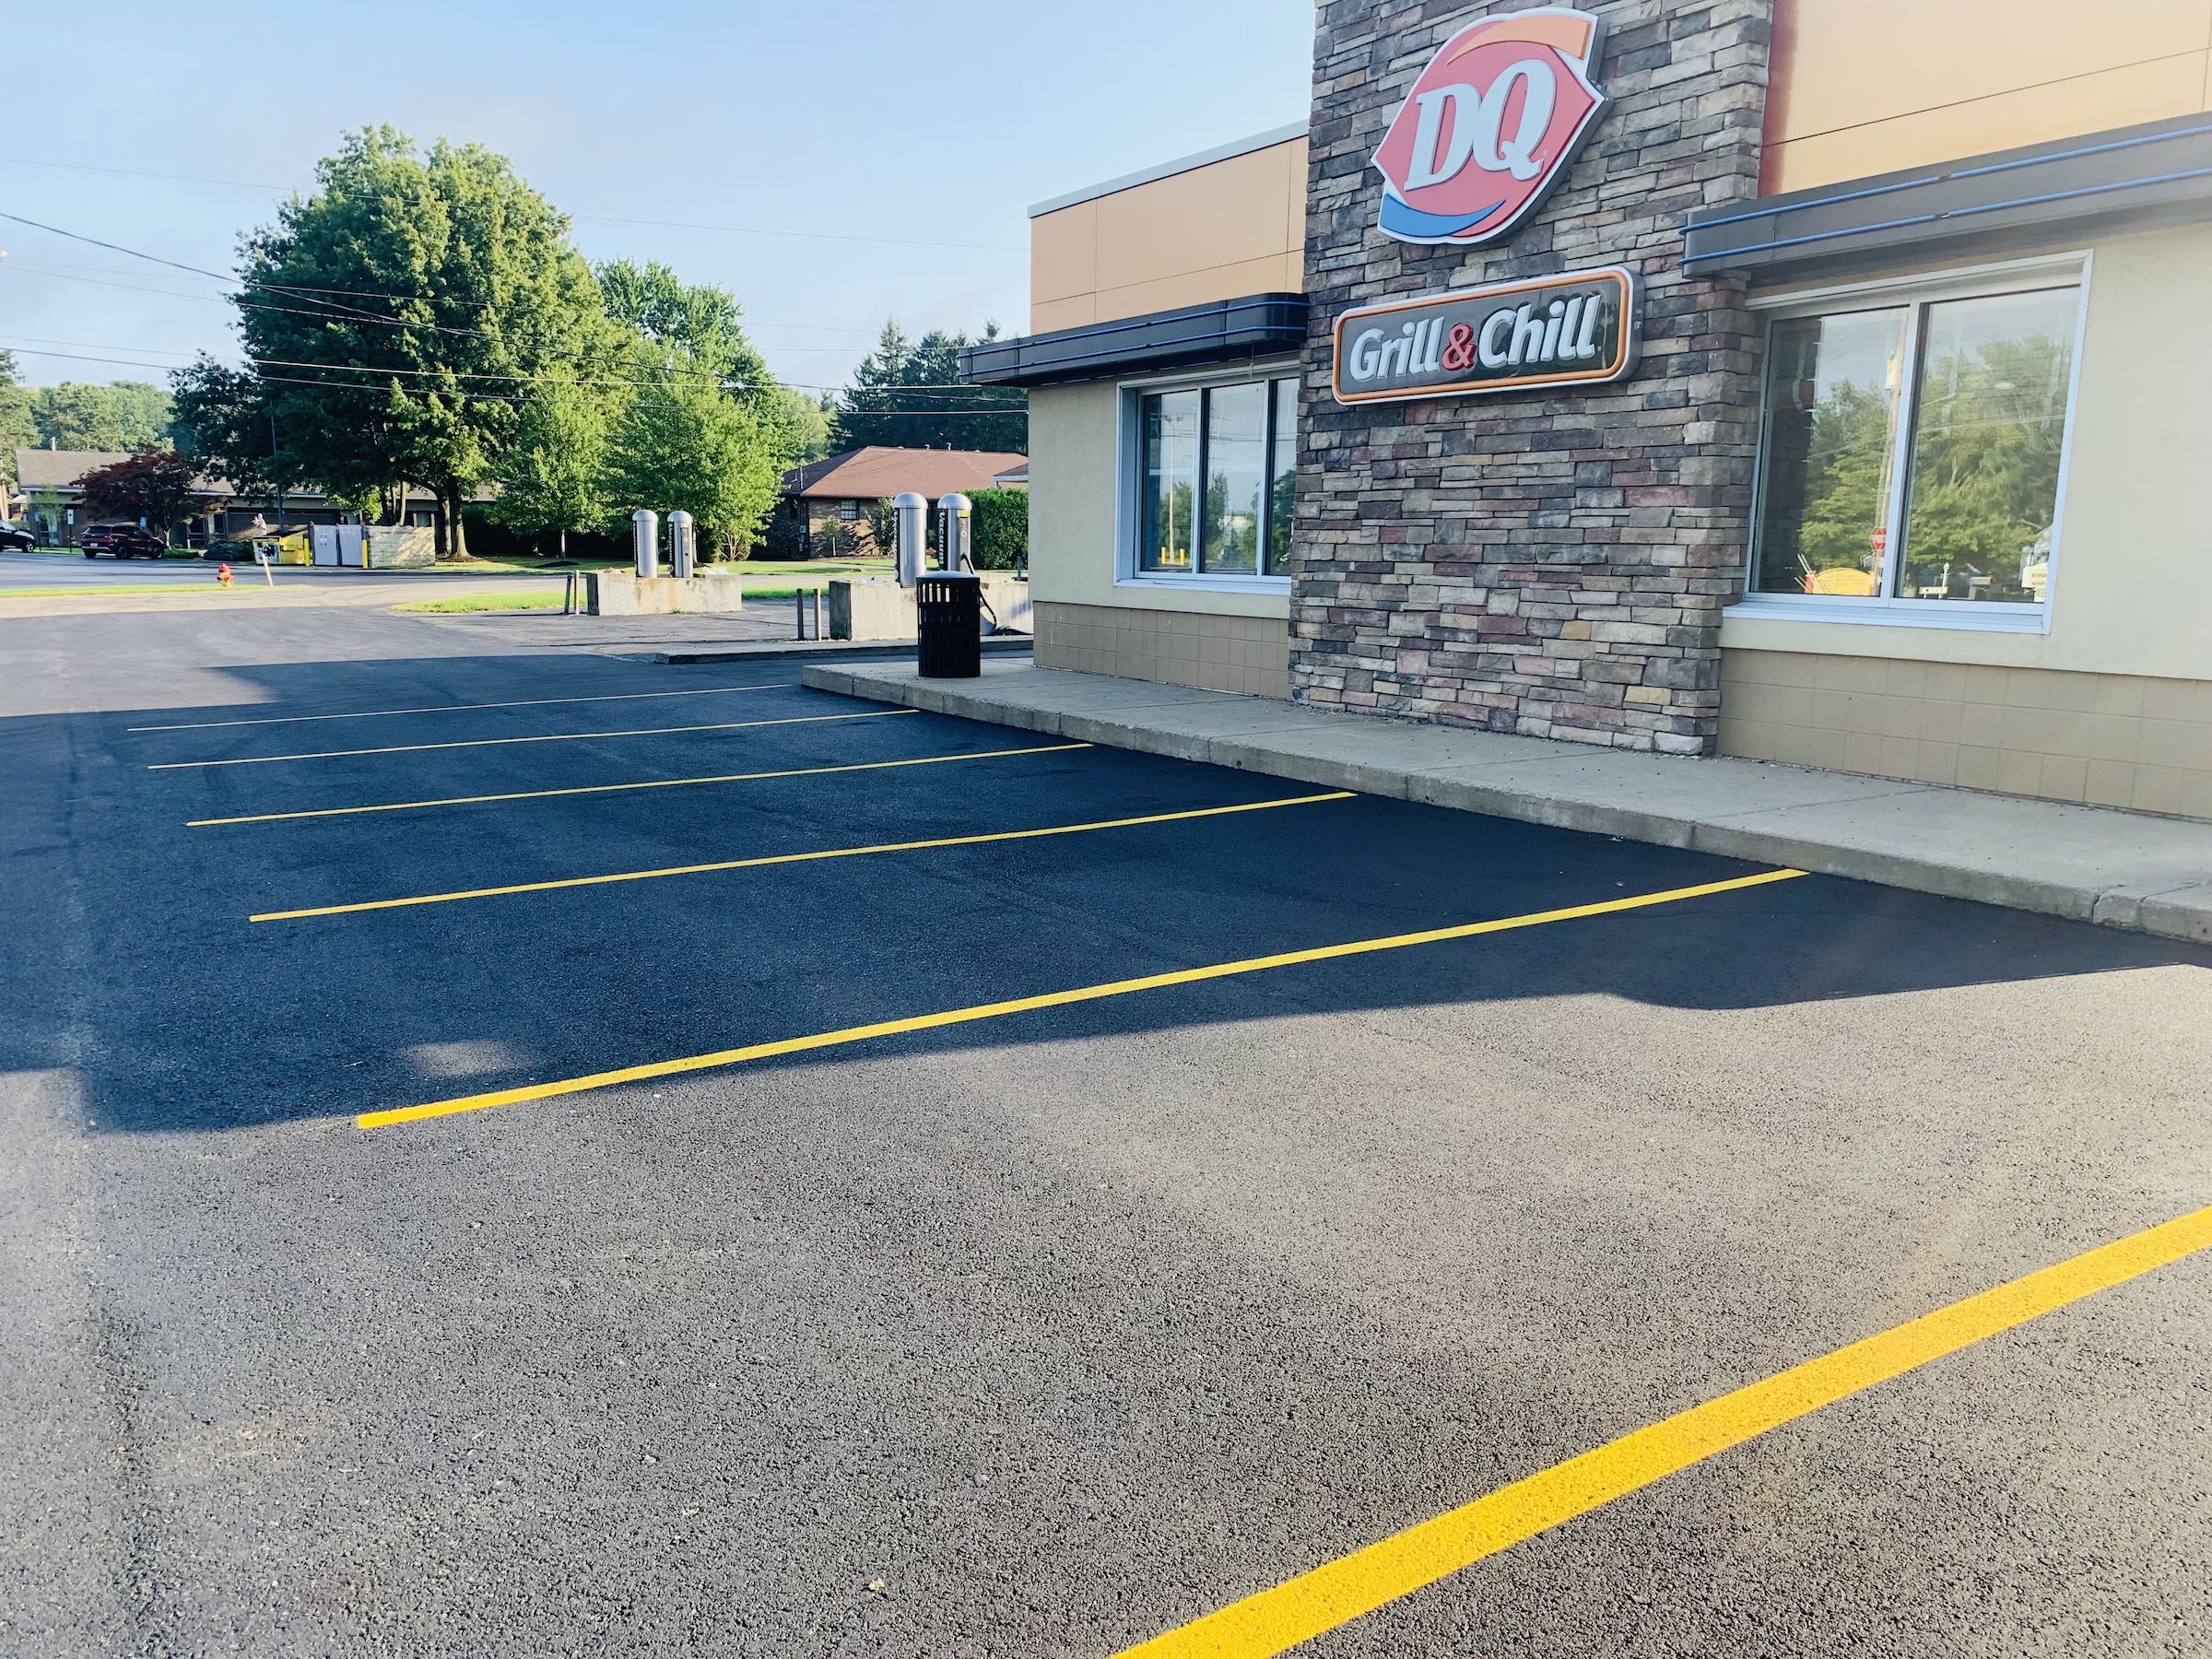 A freshly paved and painted parking lot in front of a dairy queen